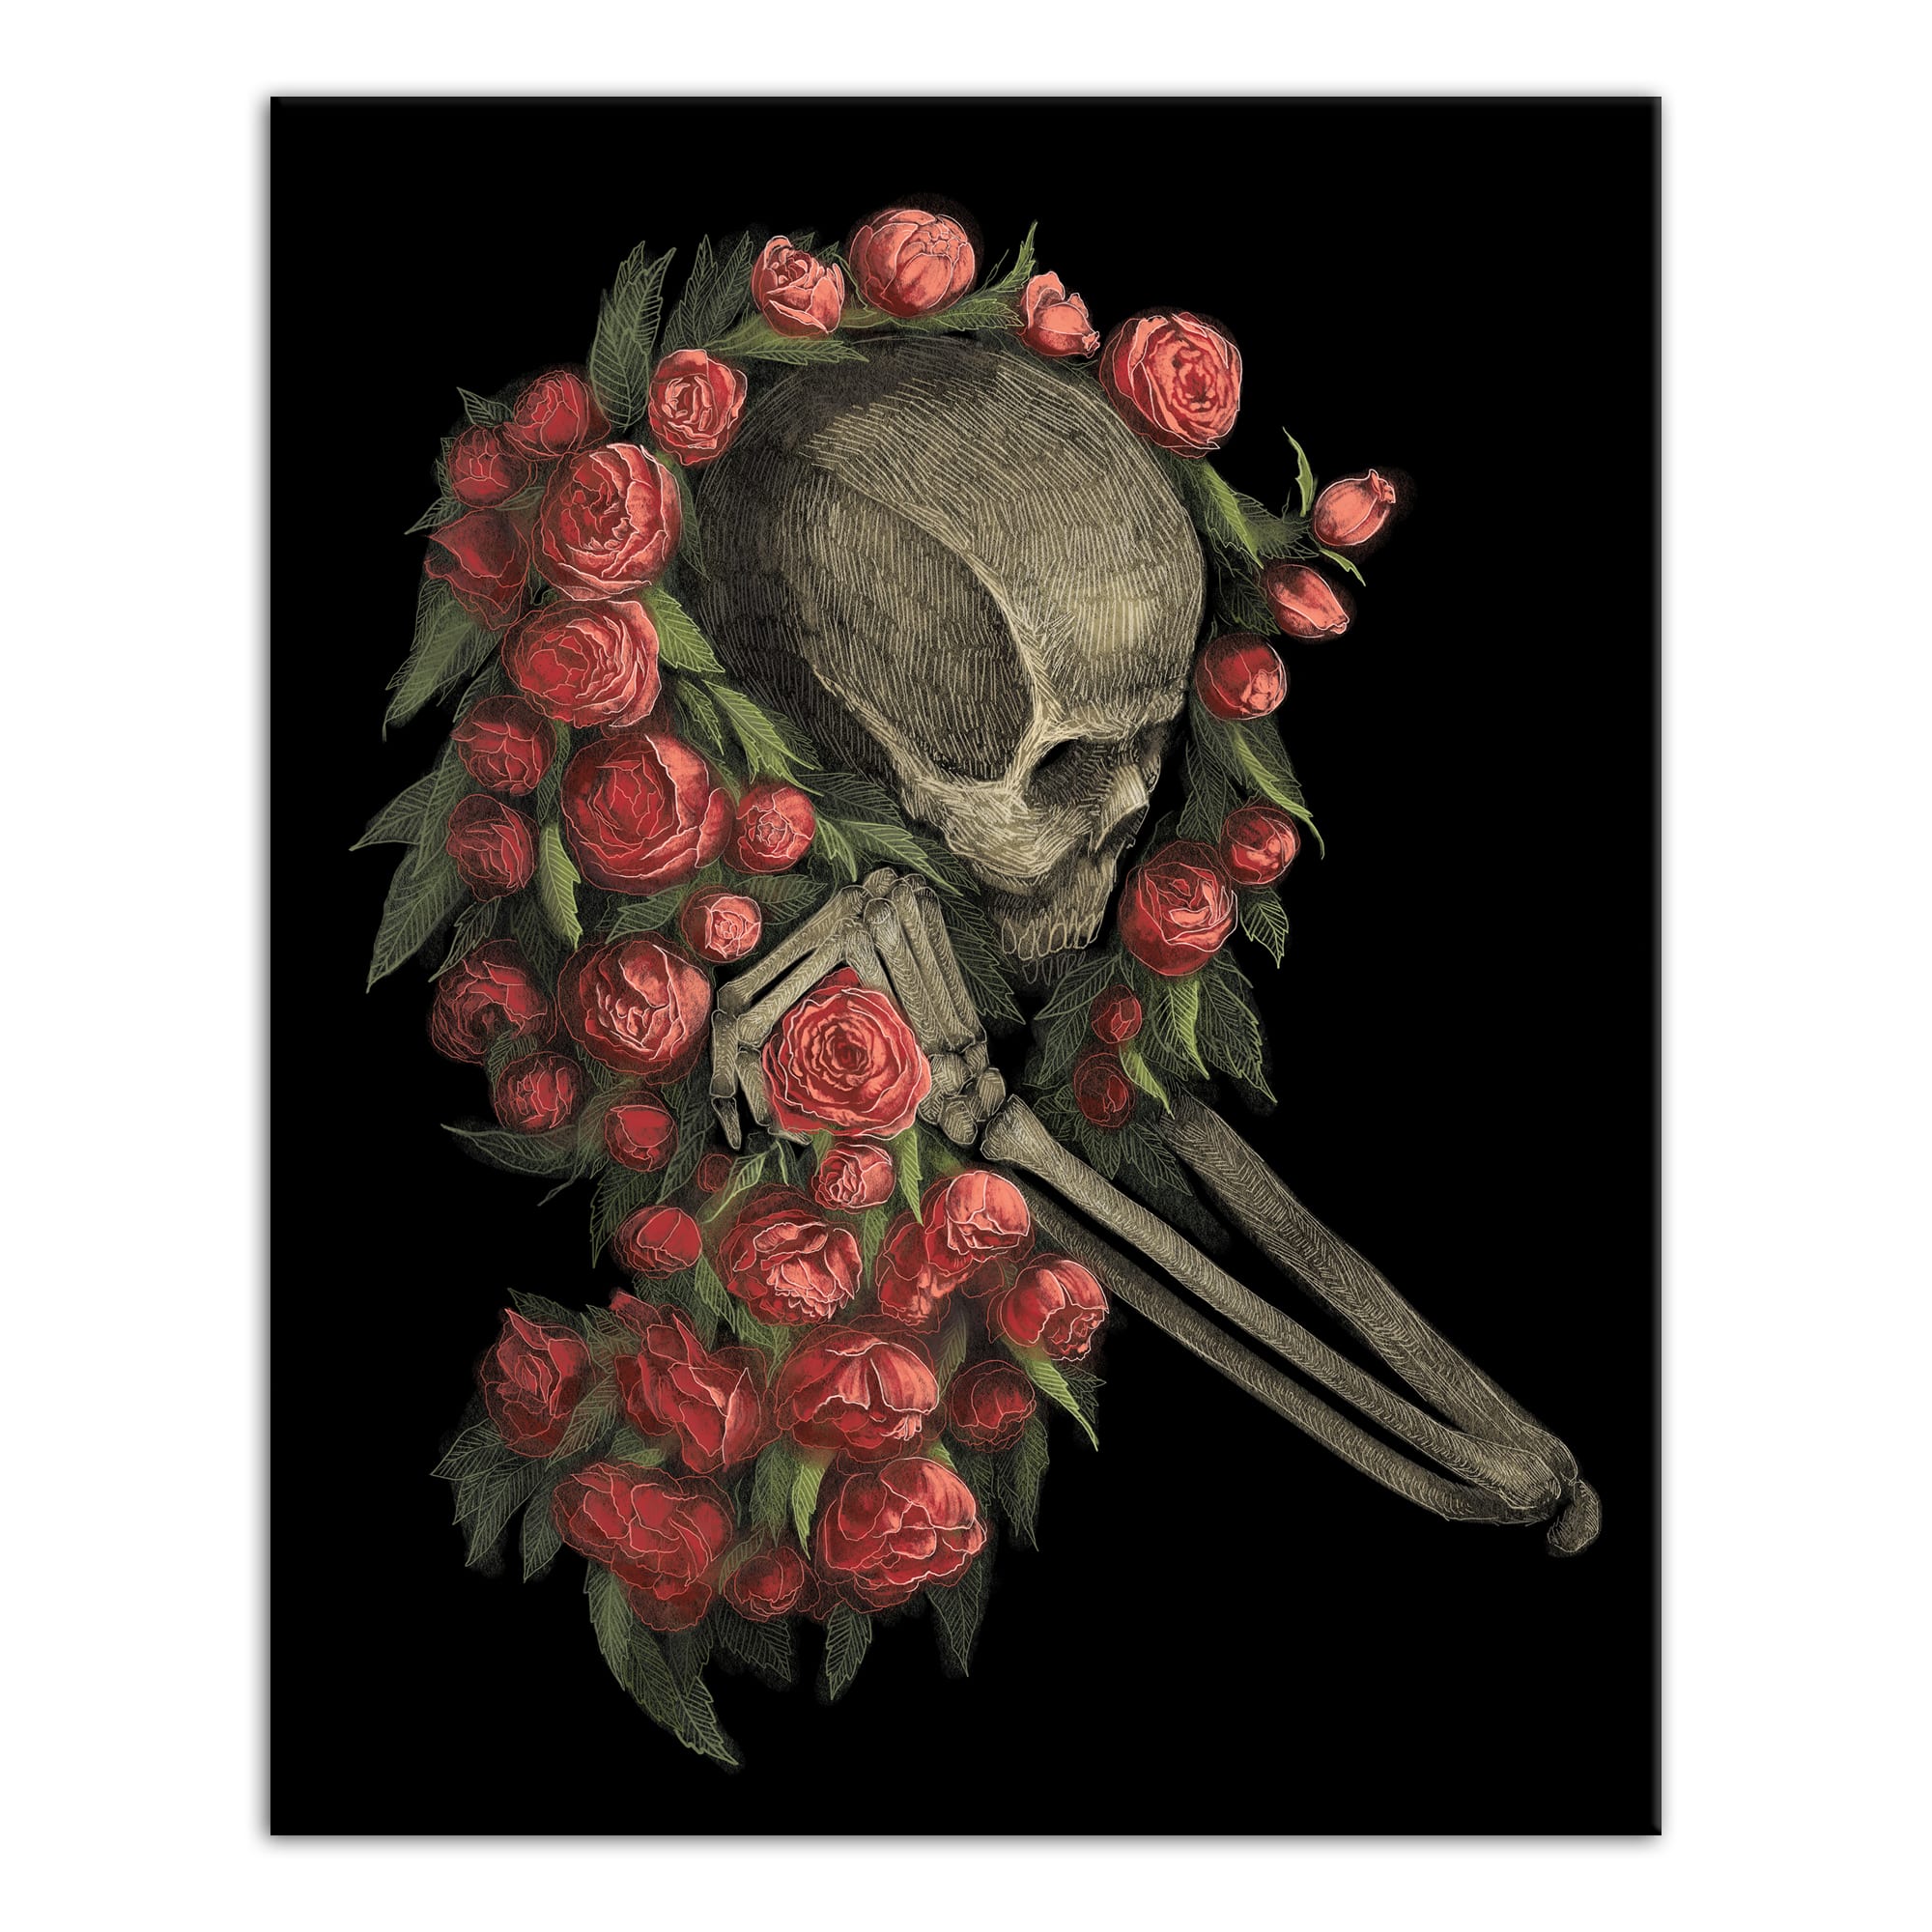 Skeleton Wrapped in Roses Canvas Wall Art